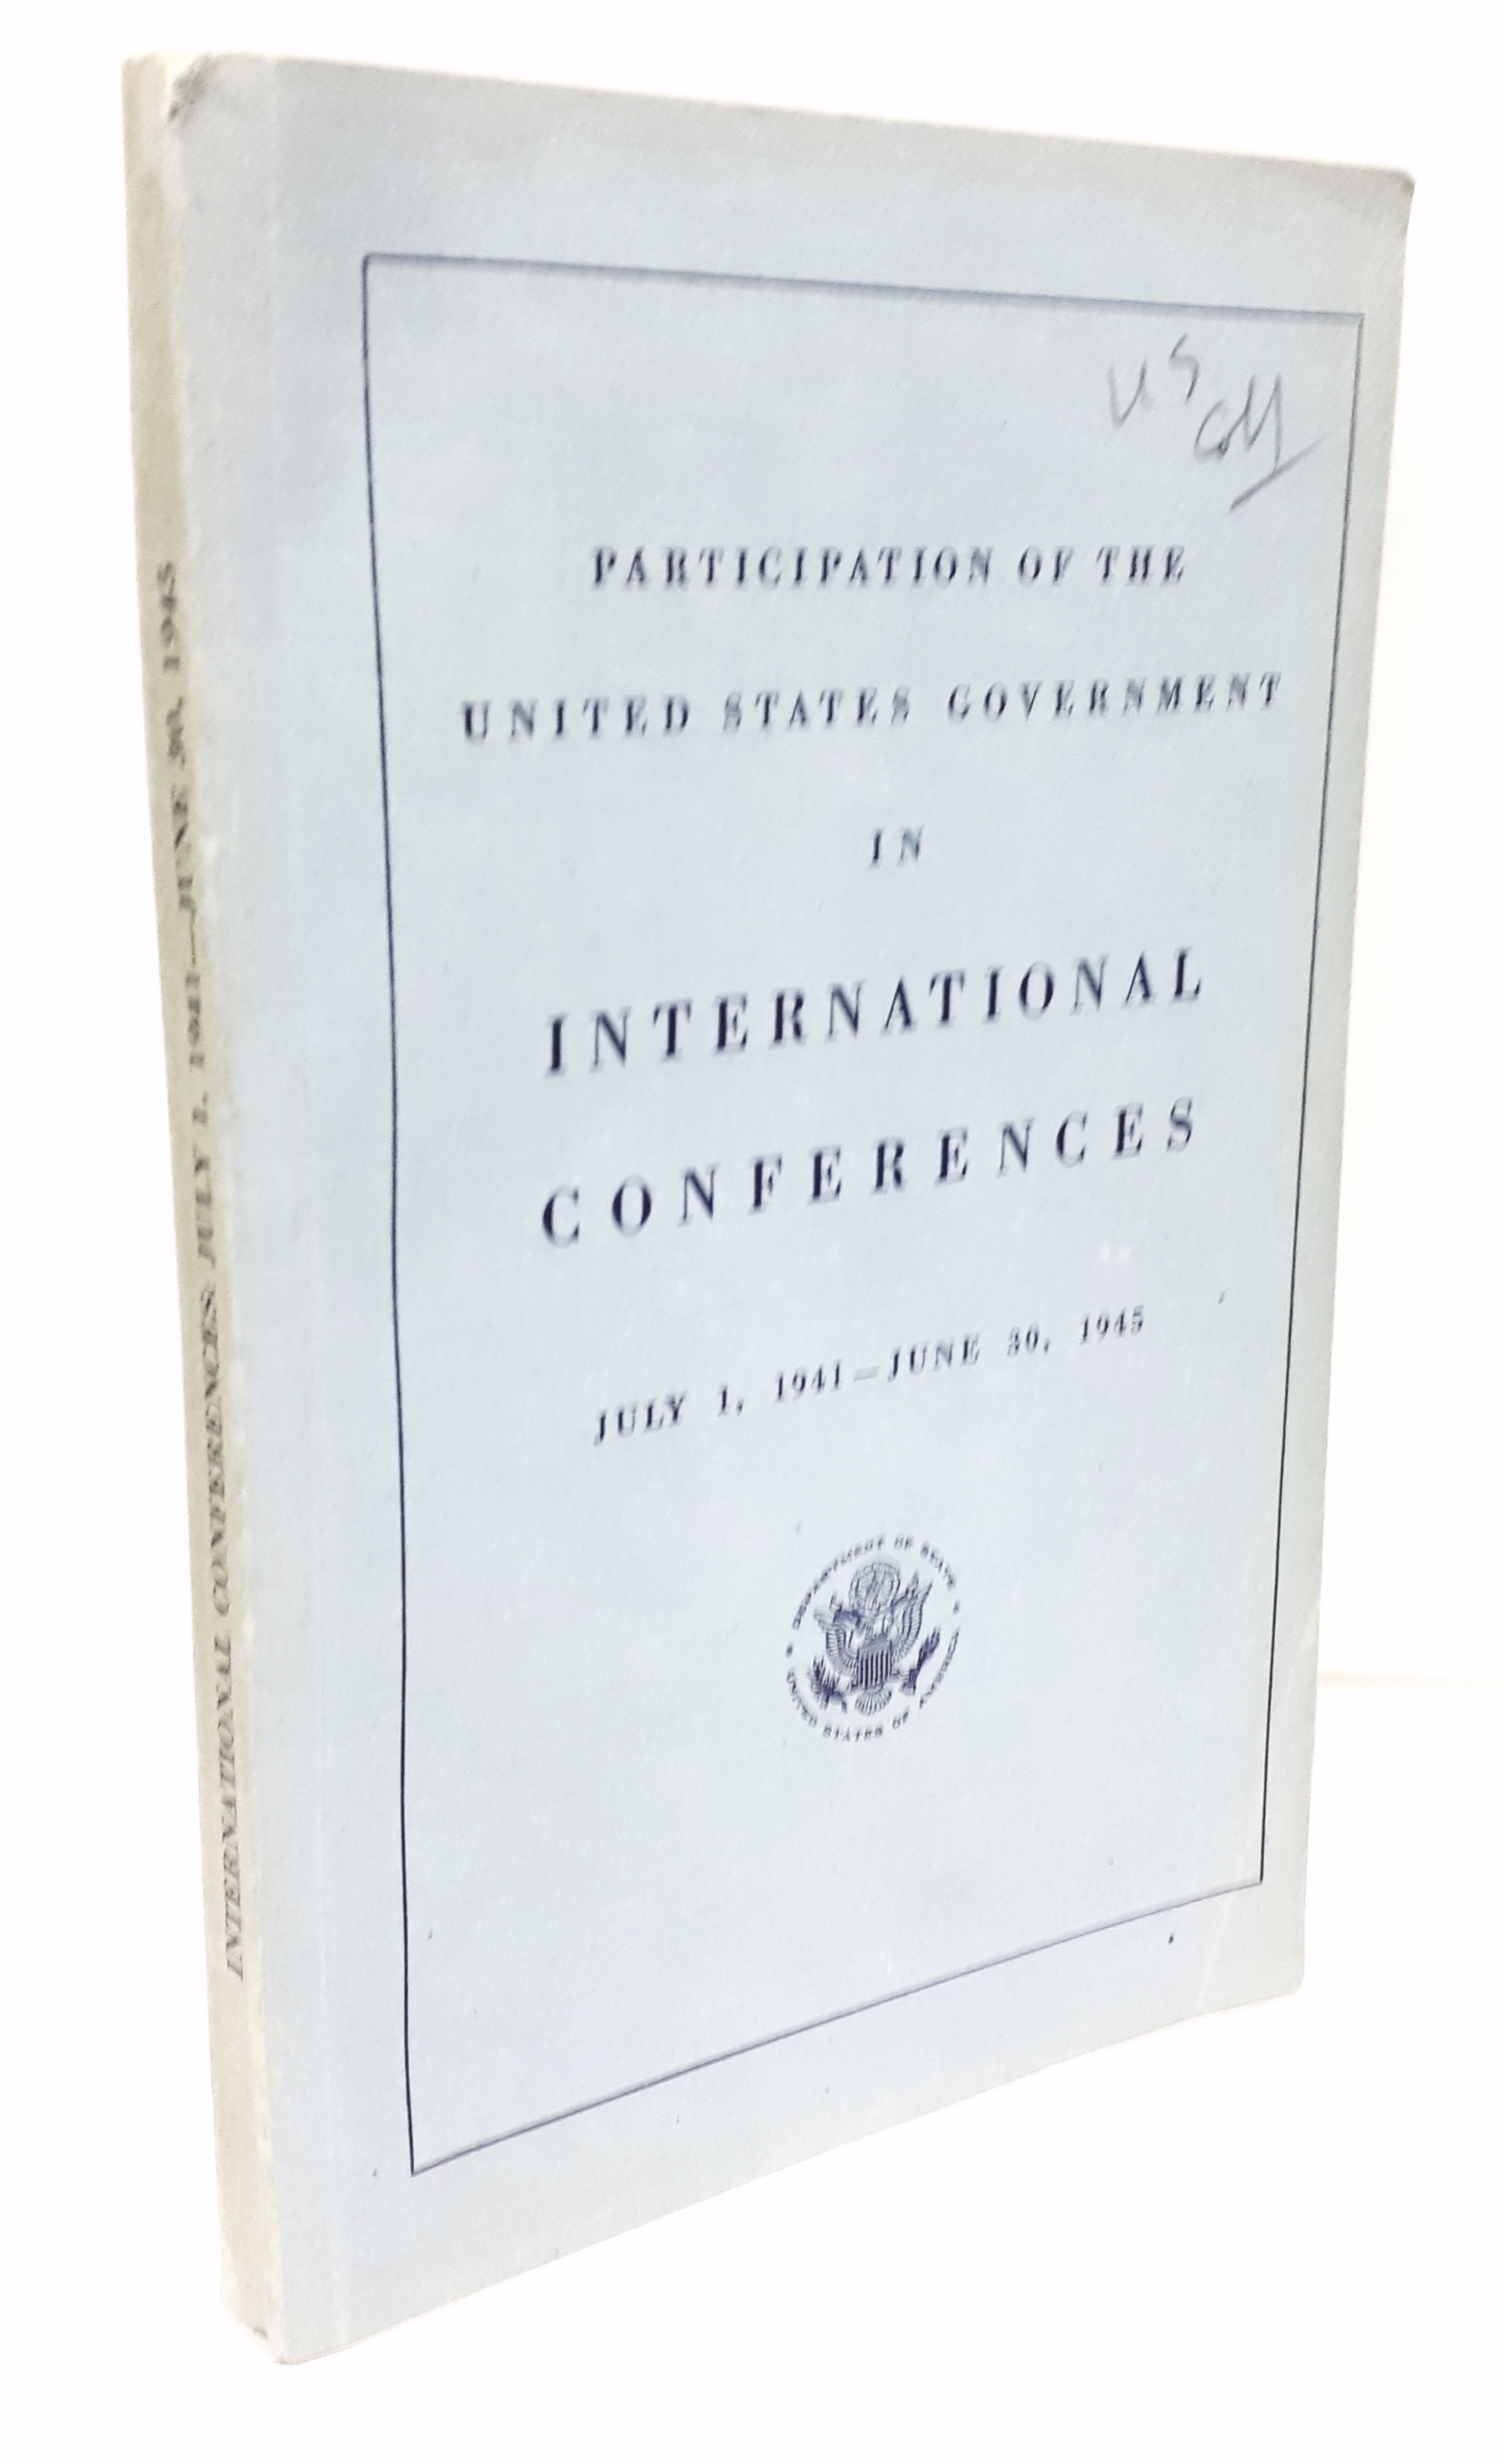  - Participation of the United States Government in International Conferences, July 1, 1941-June 30, 1945